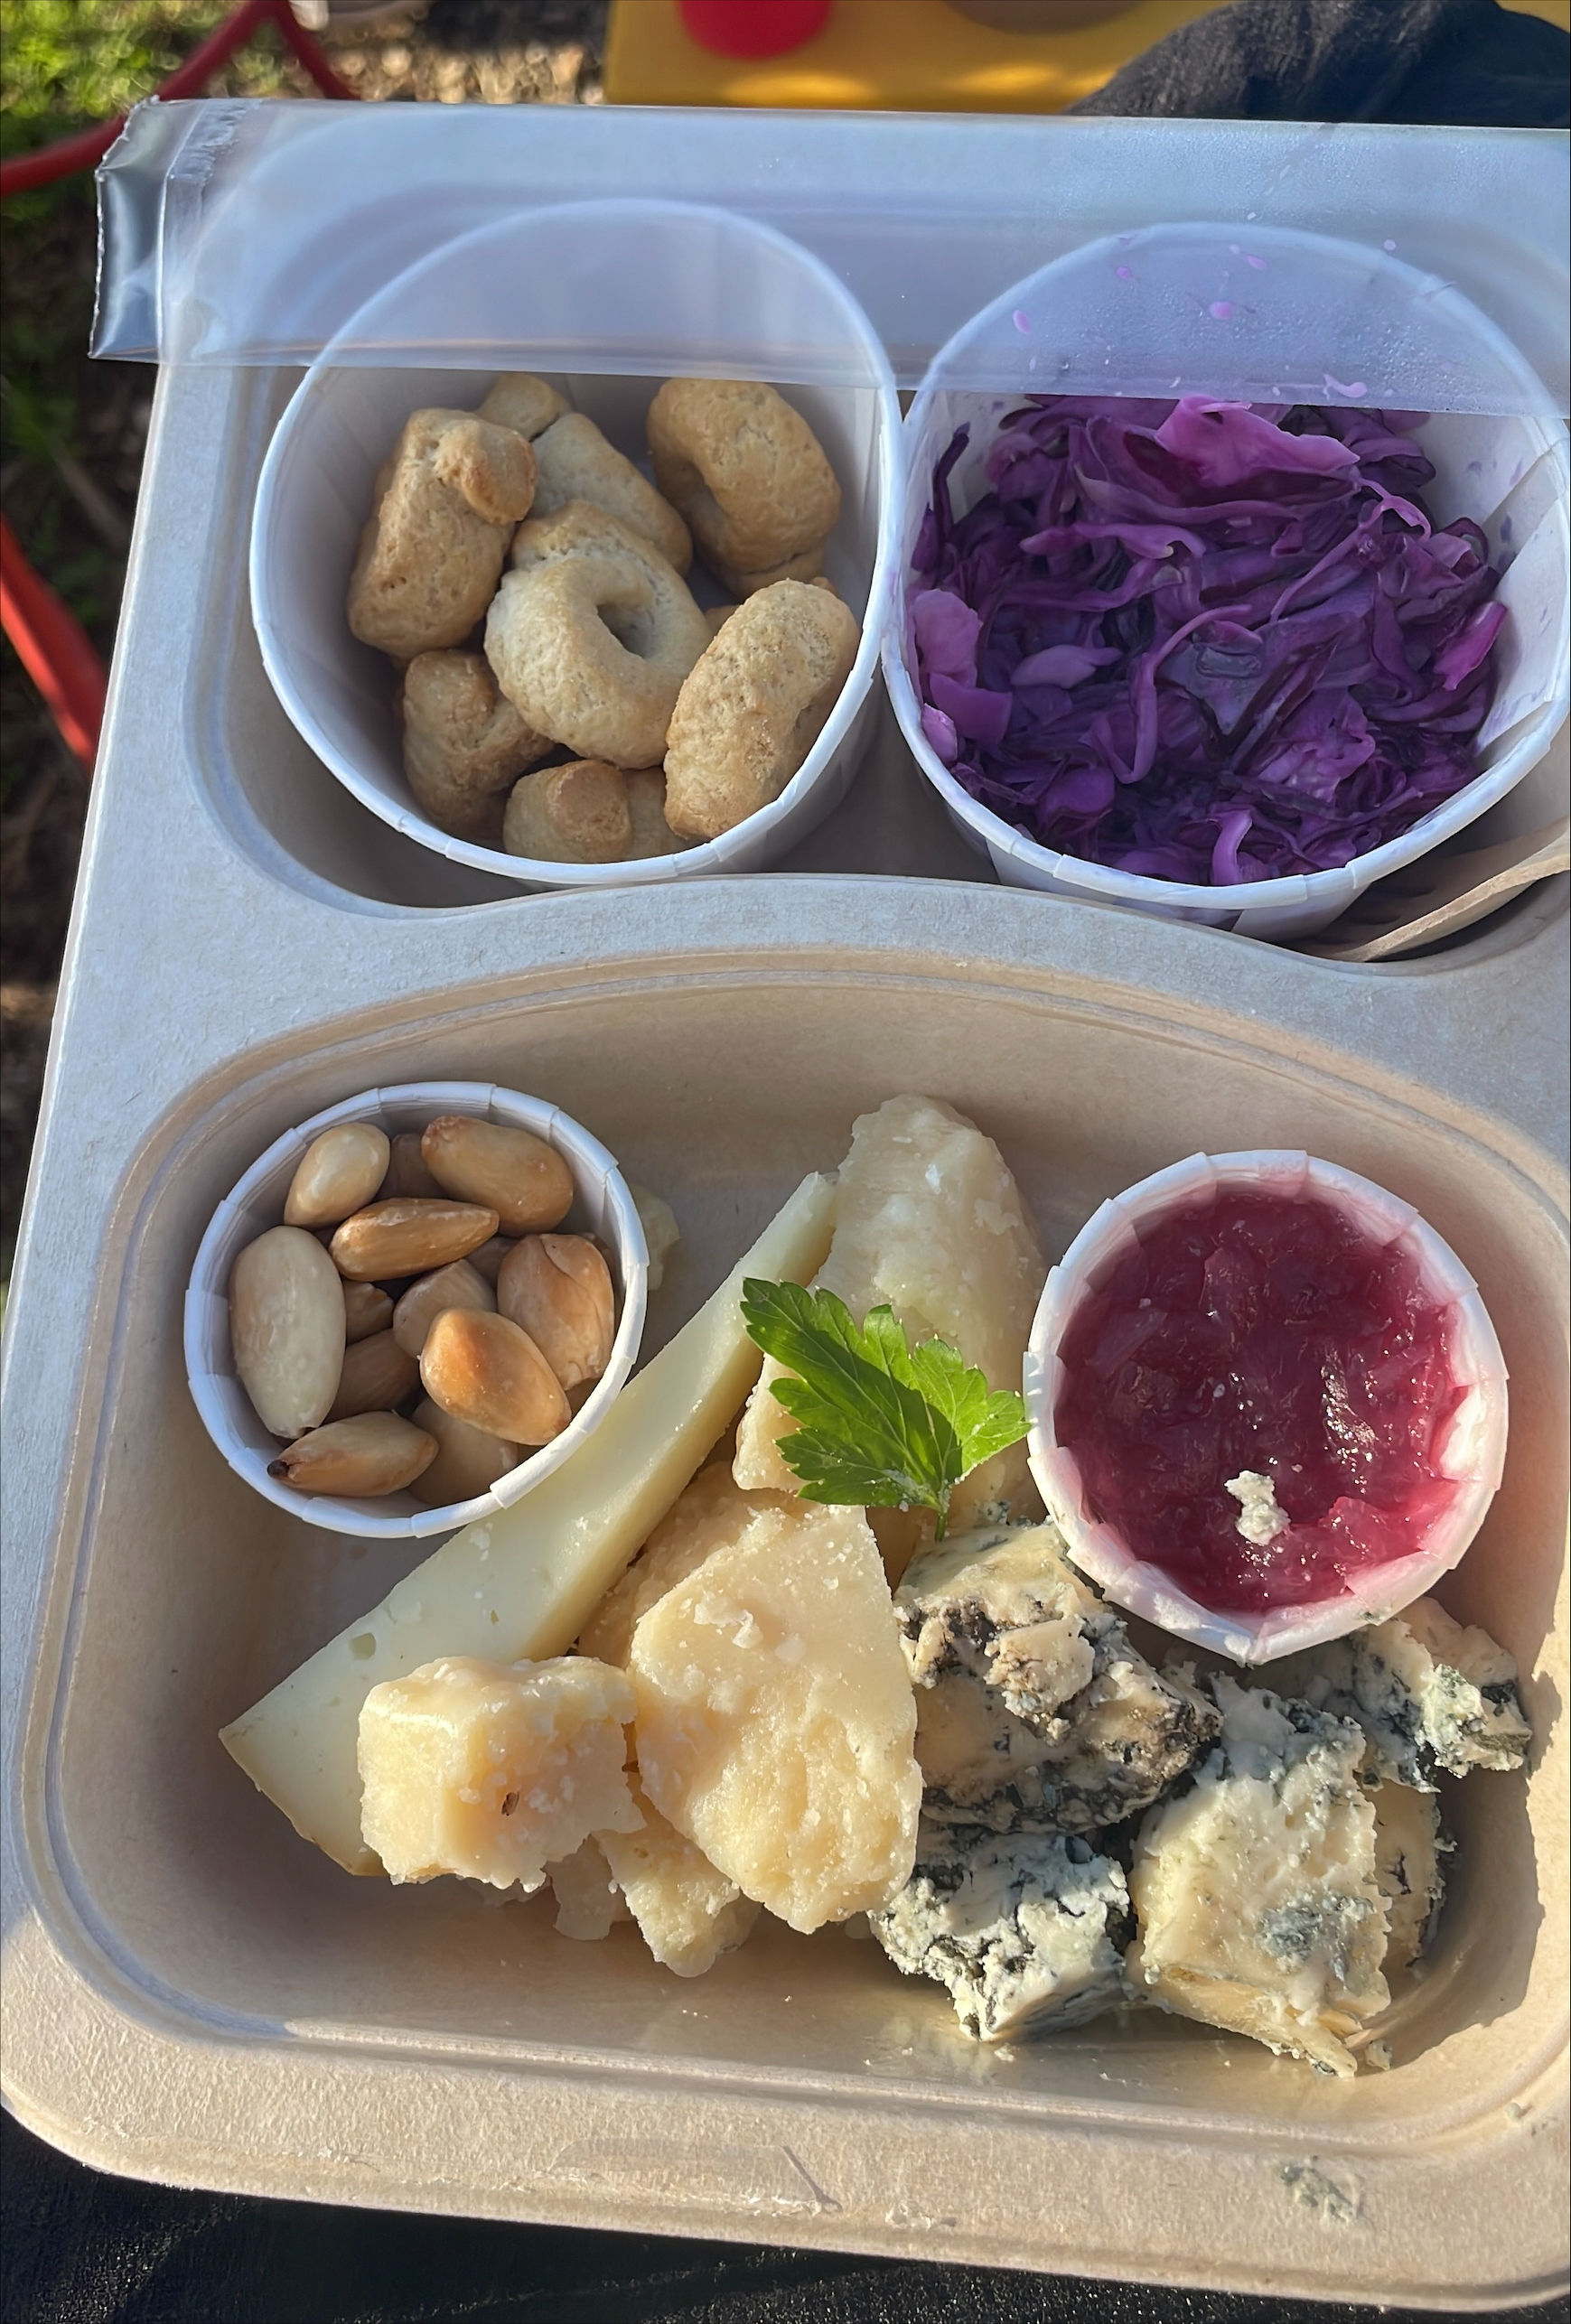 A box of food with bread, cheeses, jam, cabbage, and nuts.